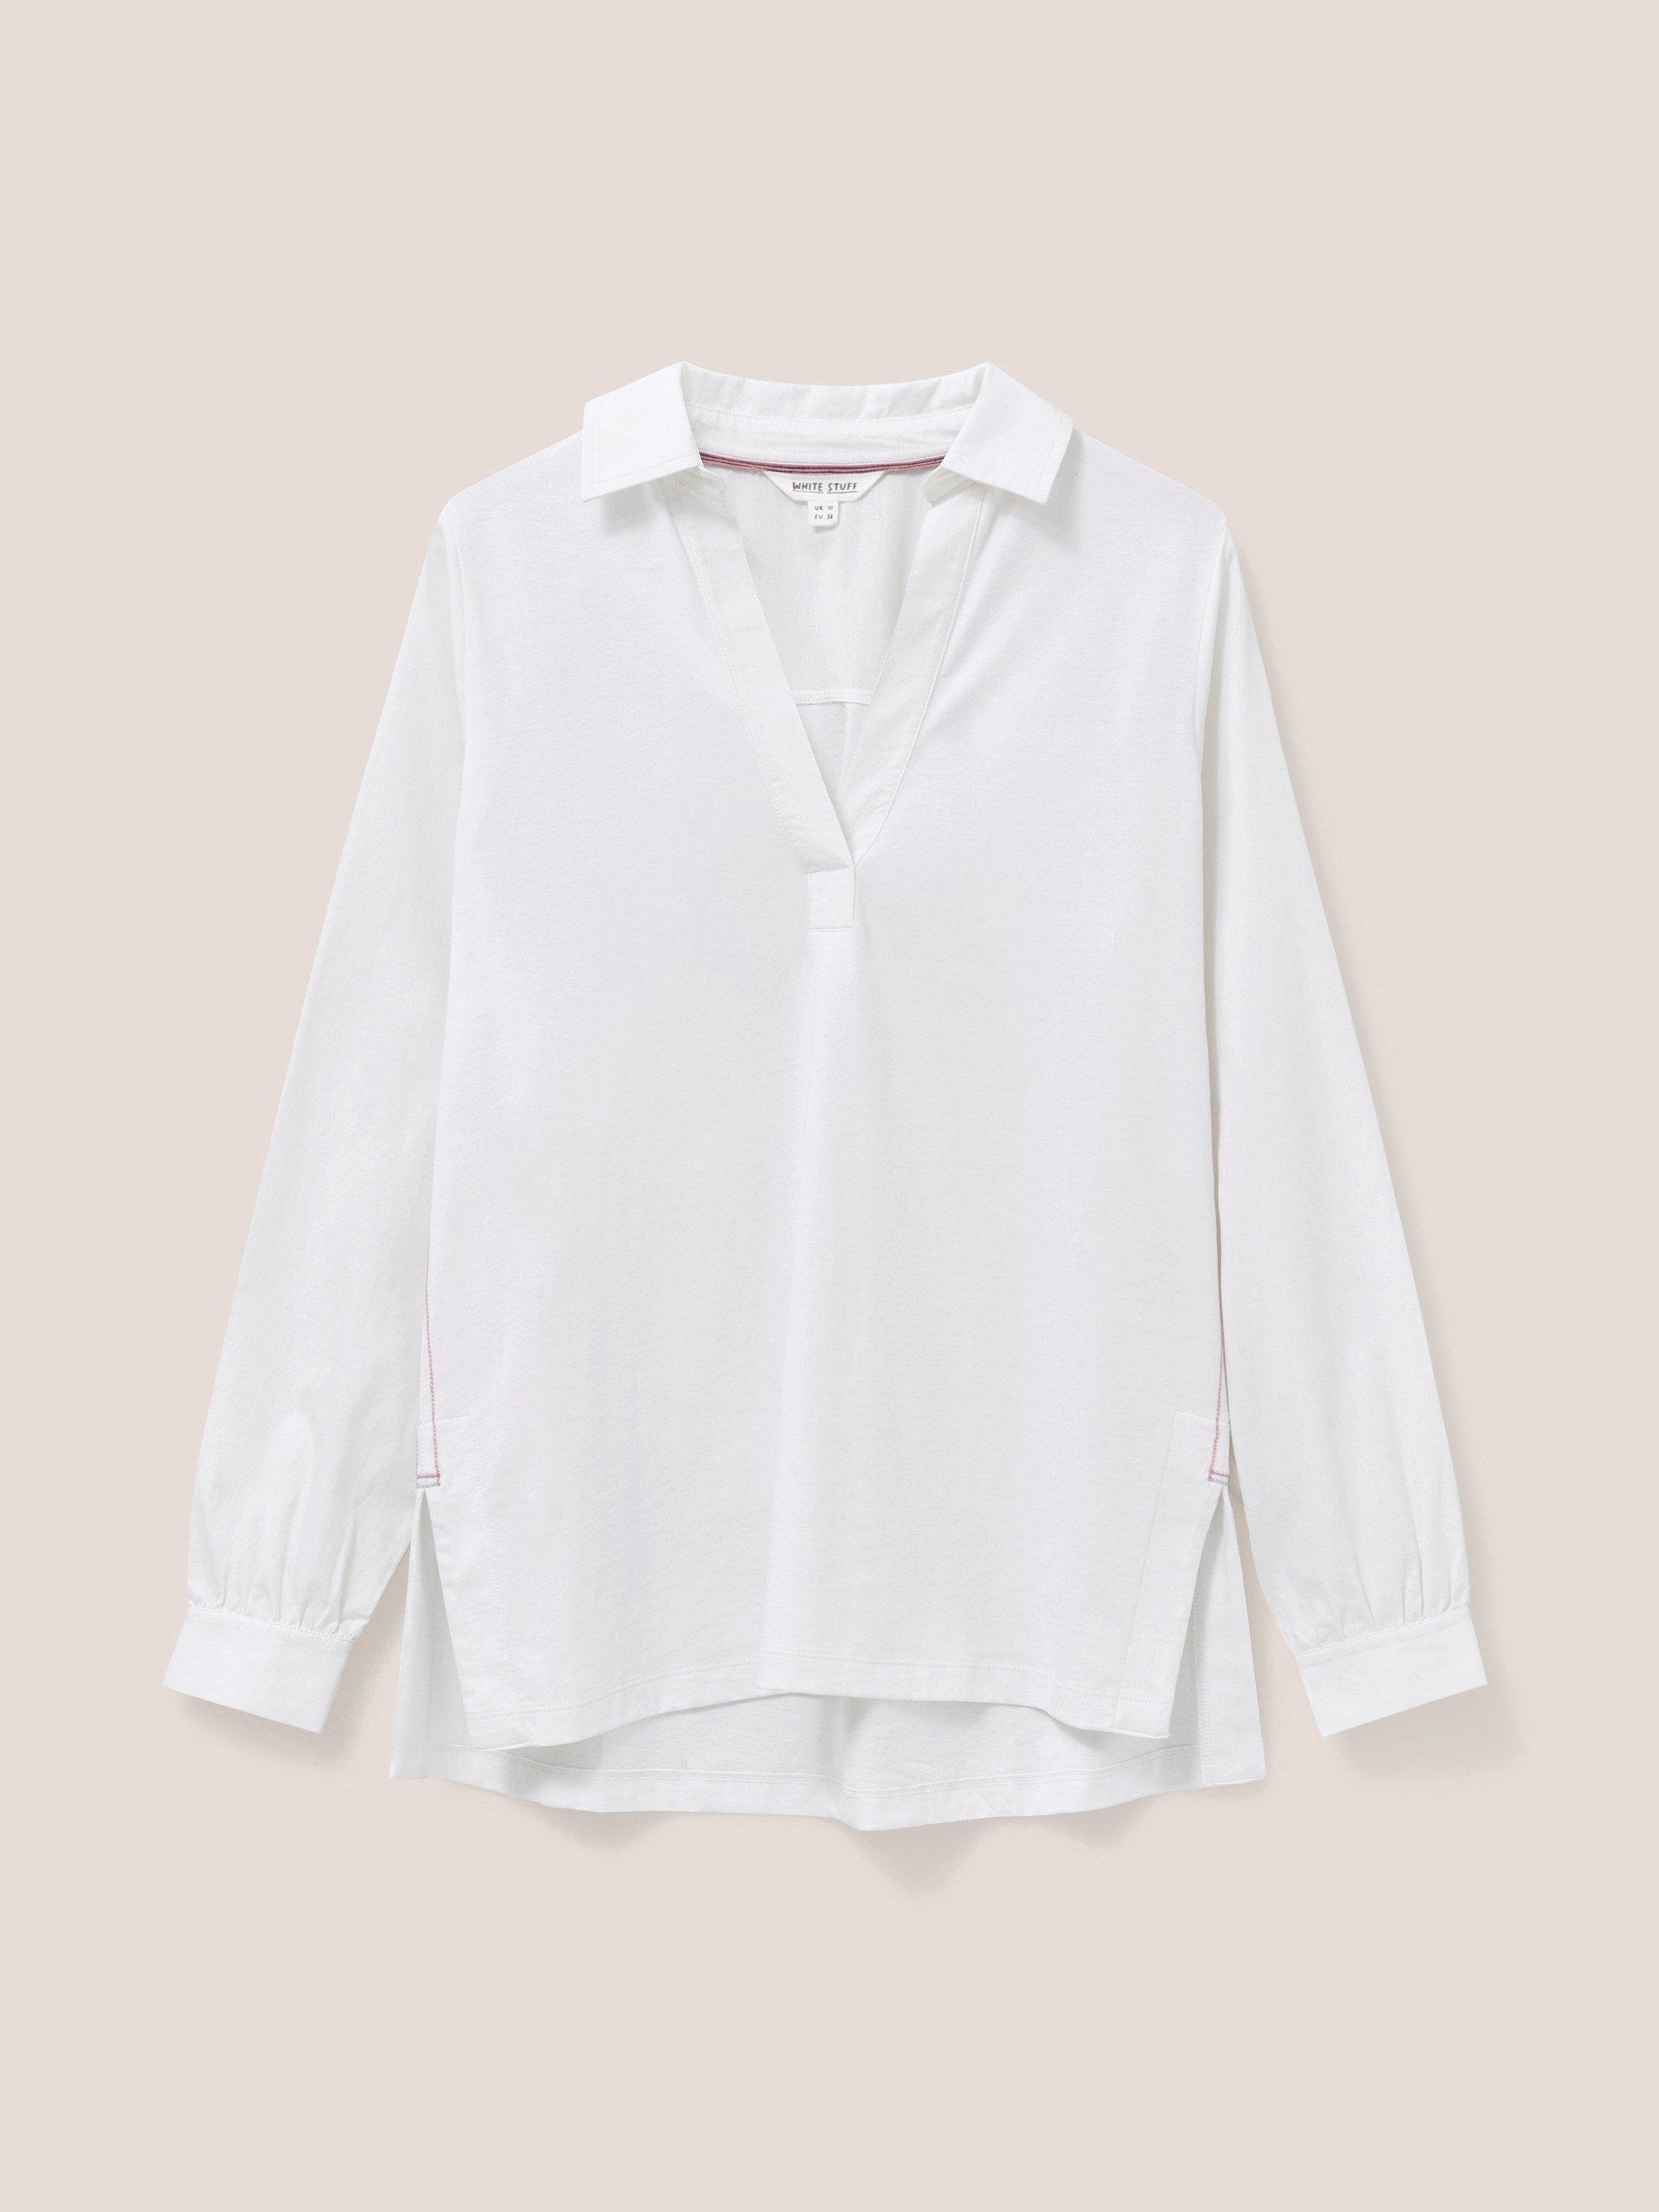 Fran Long Sleeve Shirt in BRIL WHITE - FLAT FRONT